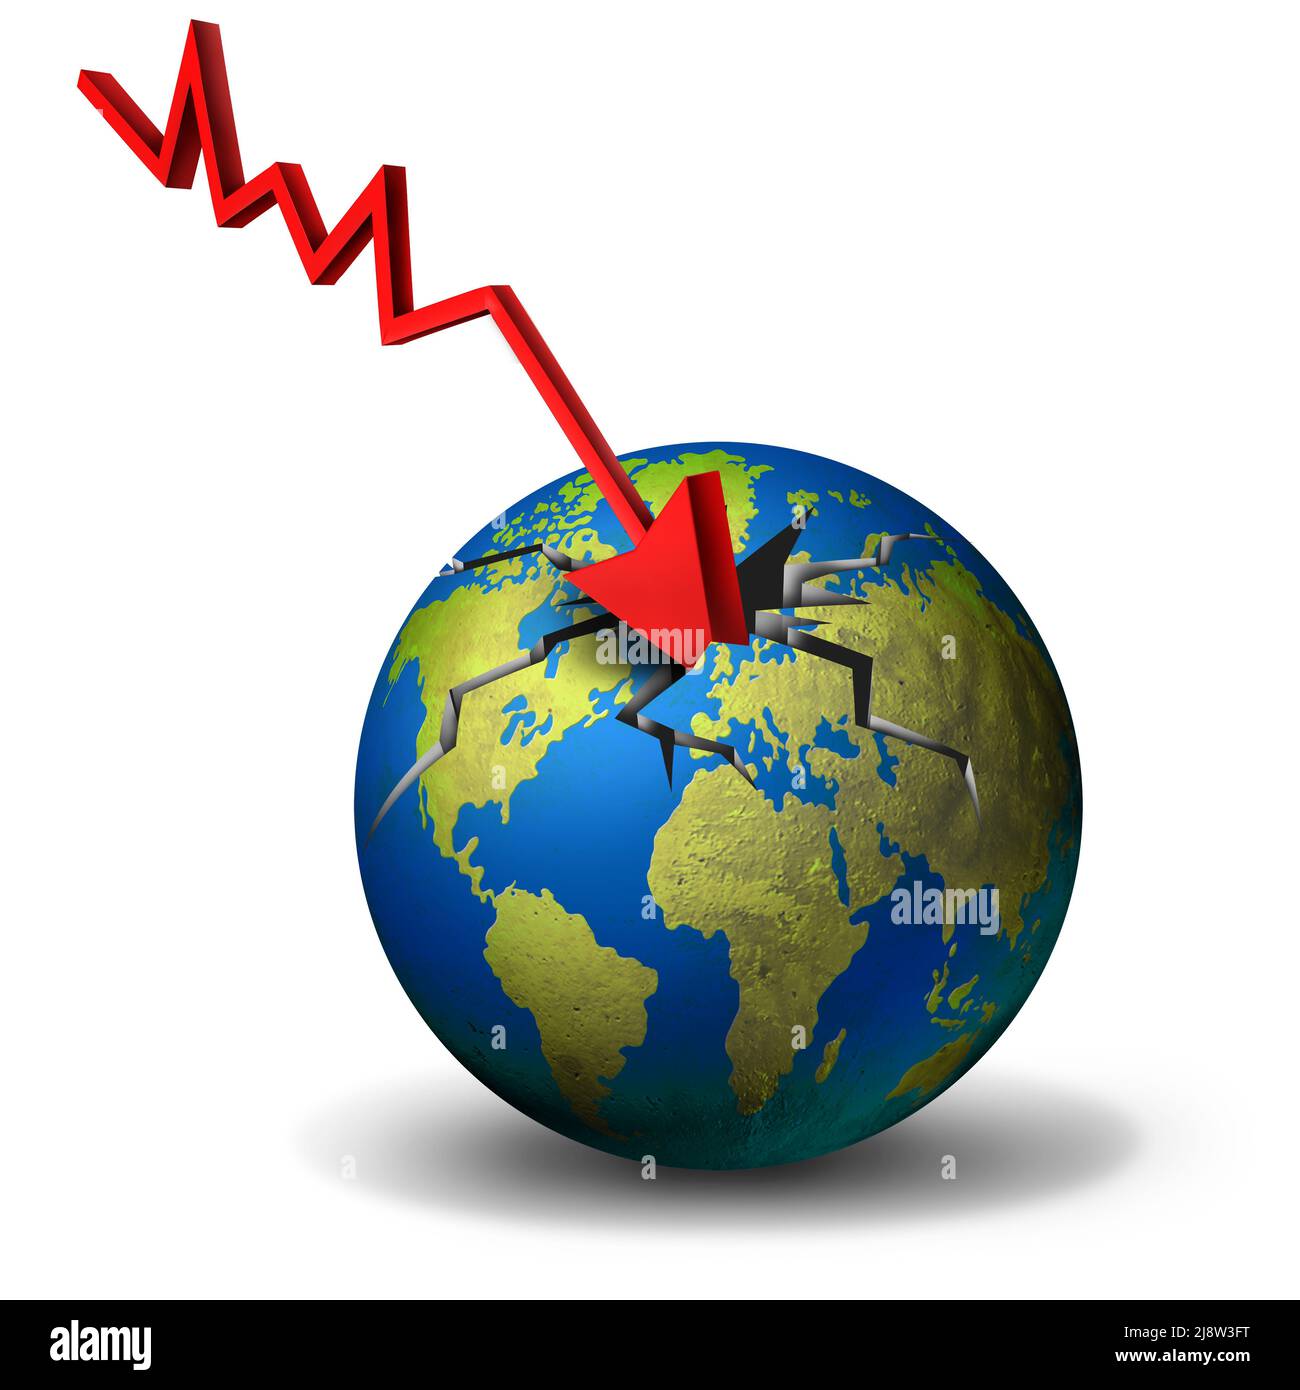 Global business decline and economic fall or world business crisis with an international economy falling with a downward arrow as a financial concept Stock Photo